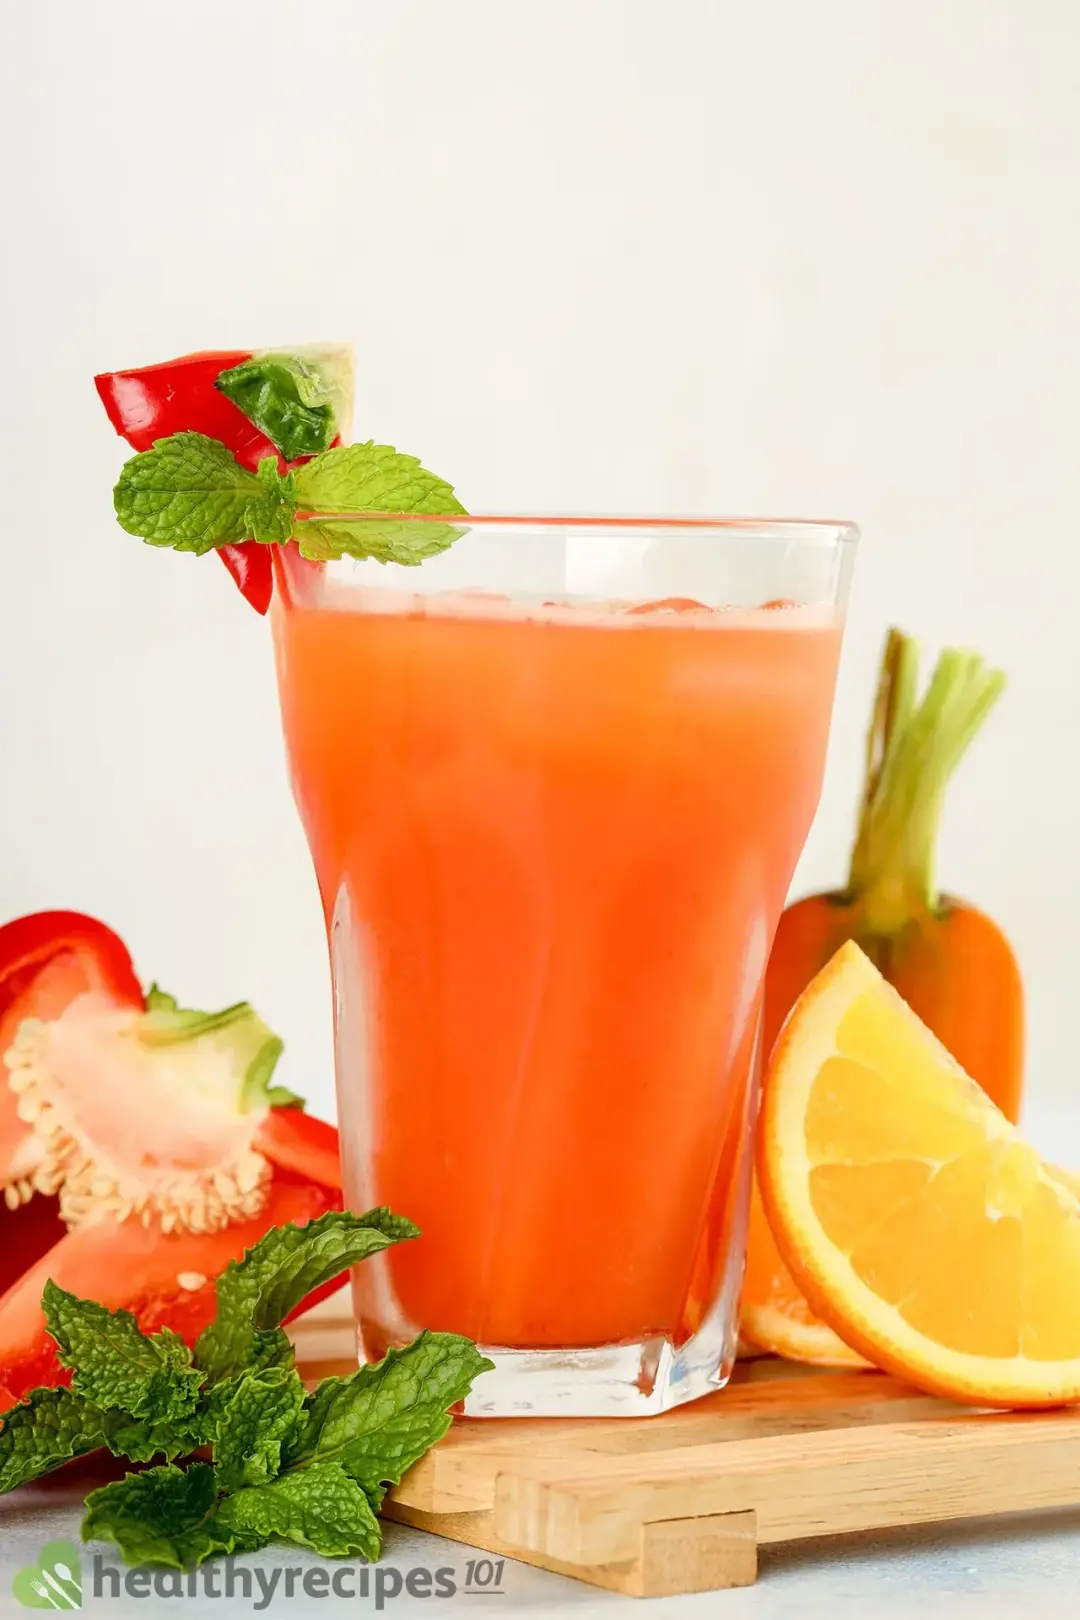 A glass of bell pepper drink garnished with mints, oranges, carrots, and half of a bell pepper